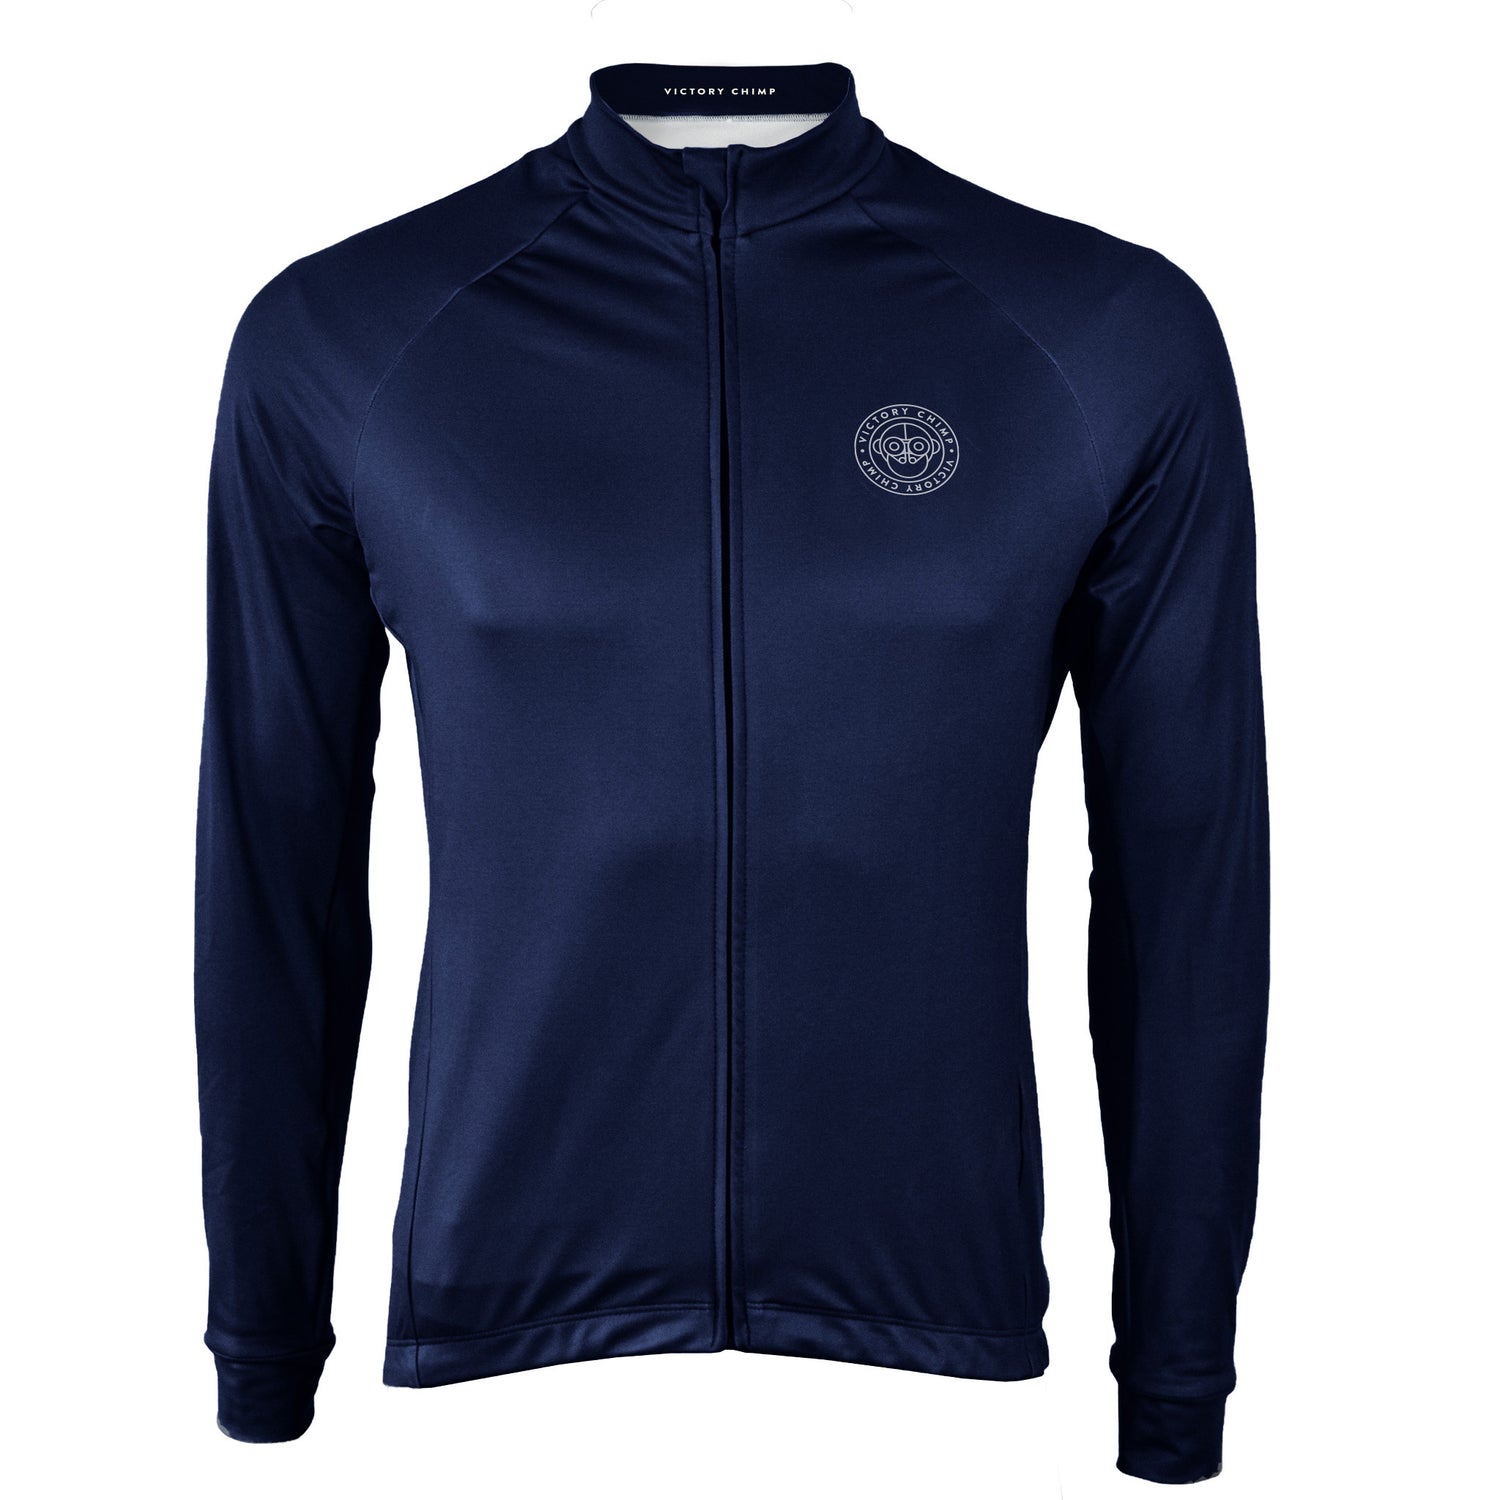 Signature Men's Long Sleeve Thermal Jersey Navy – Victory Chimp